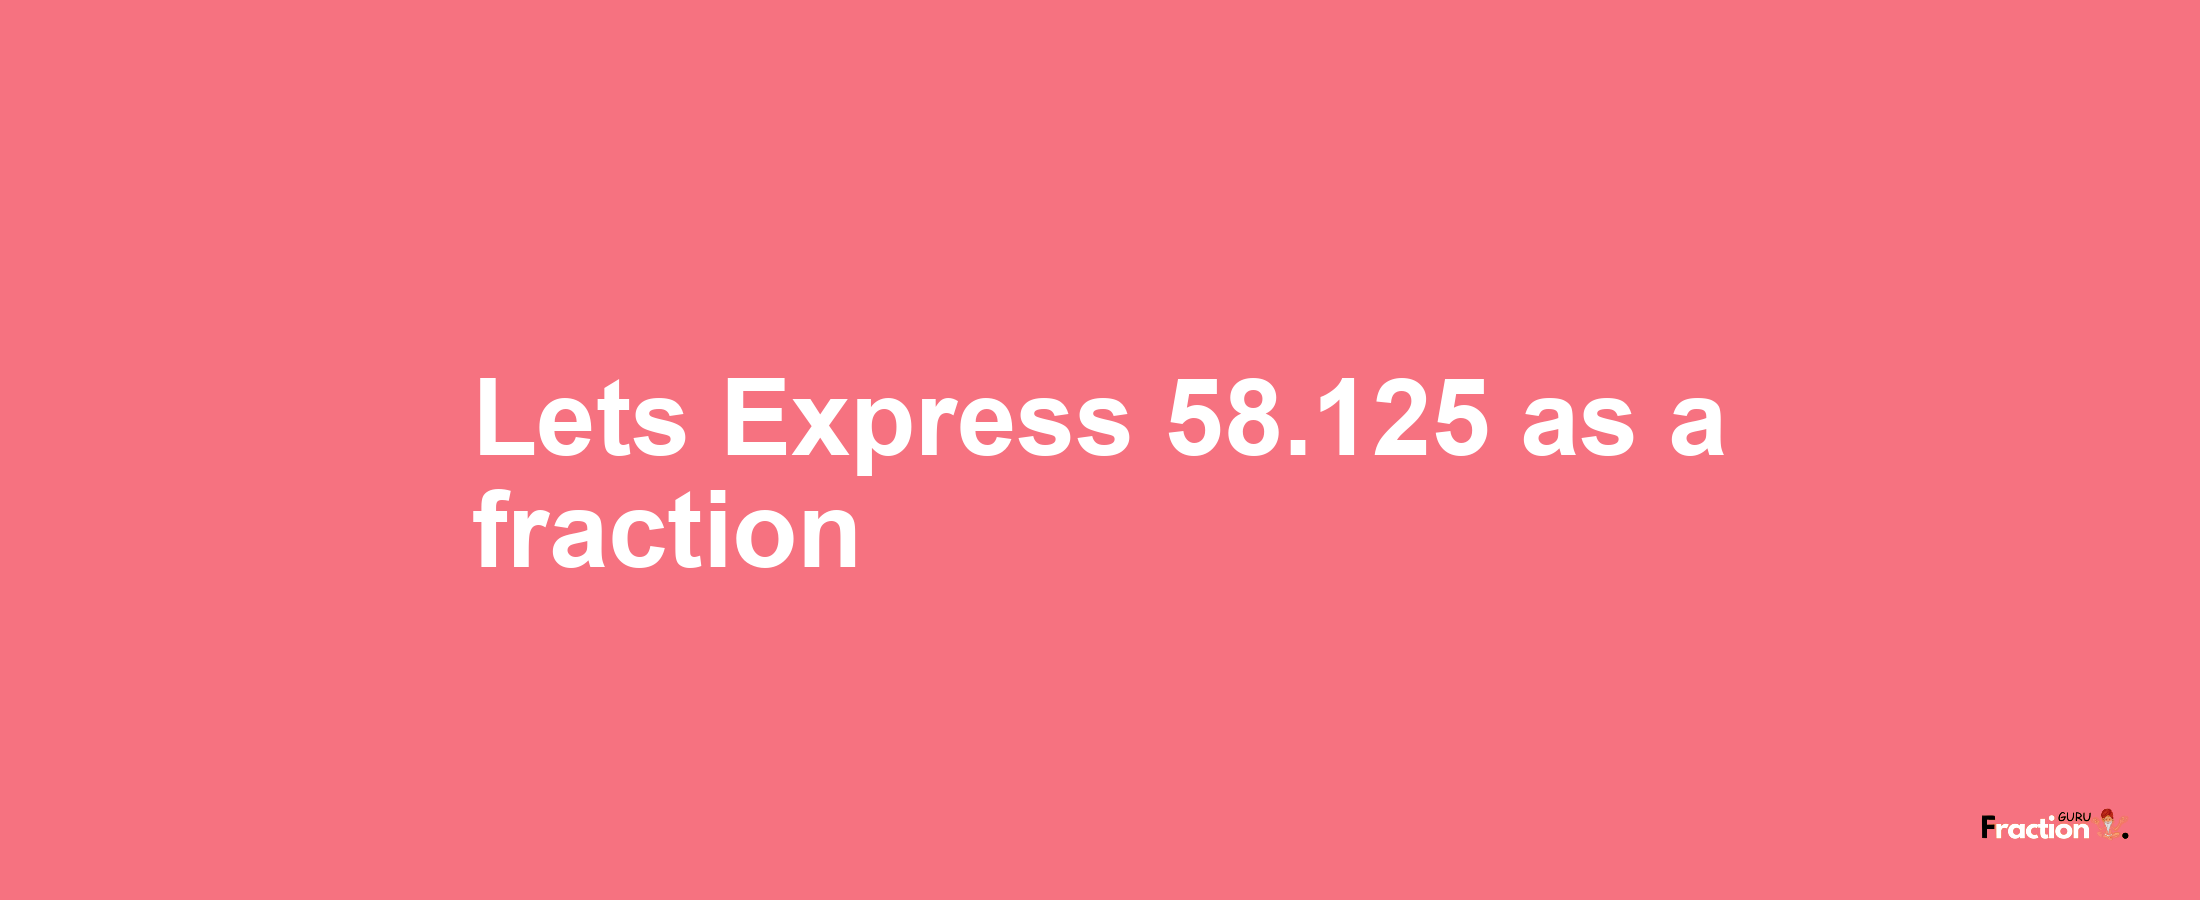 Lets Express 58.125 as afraction